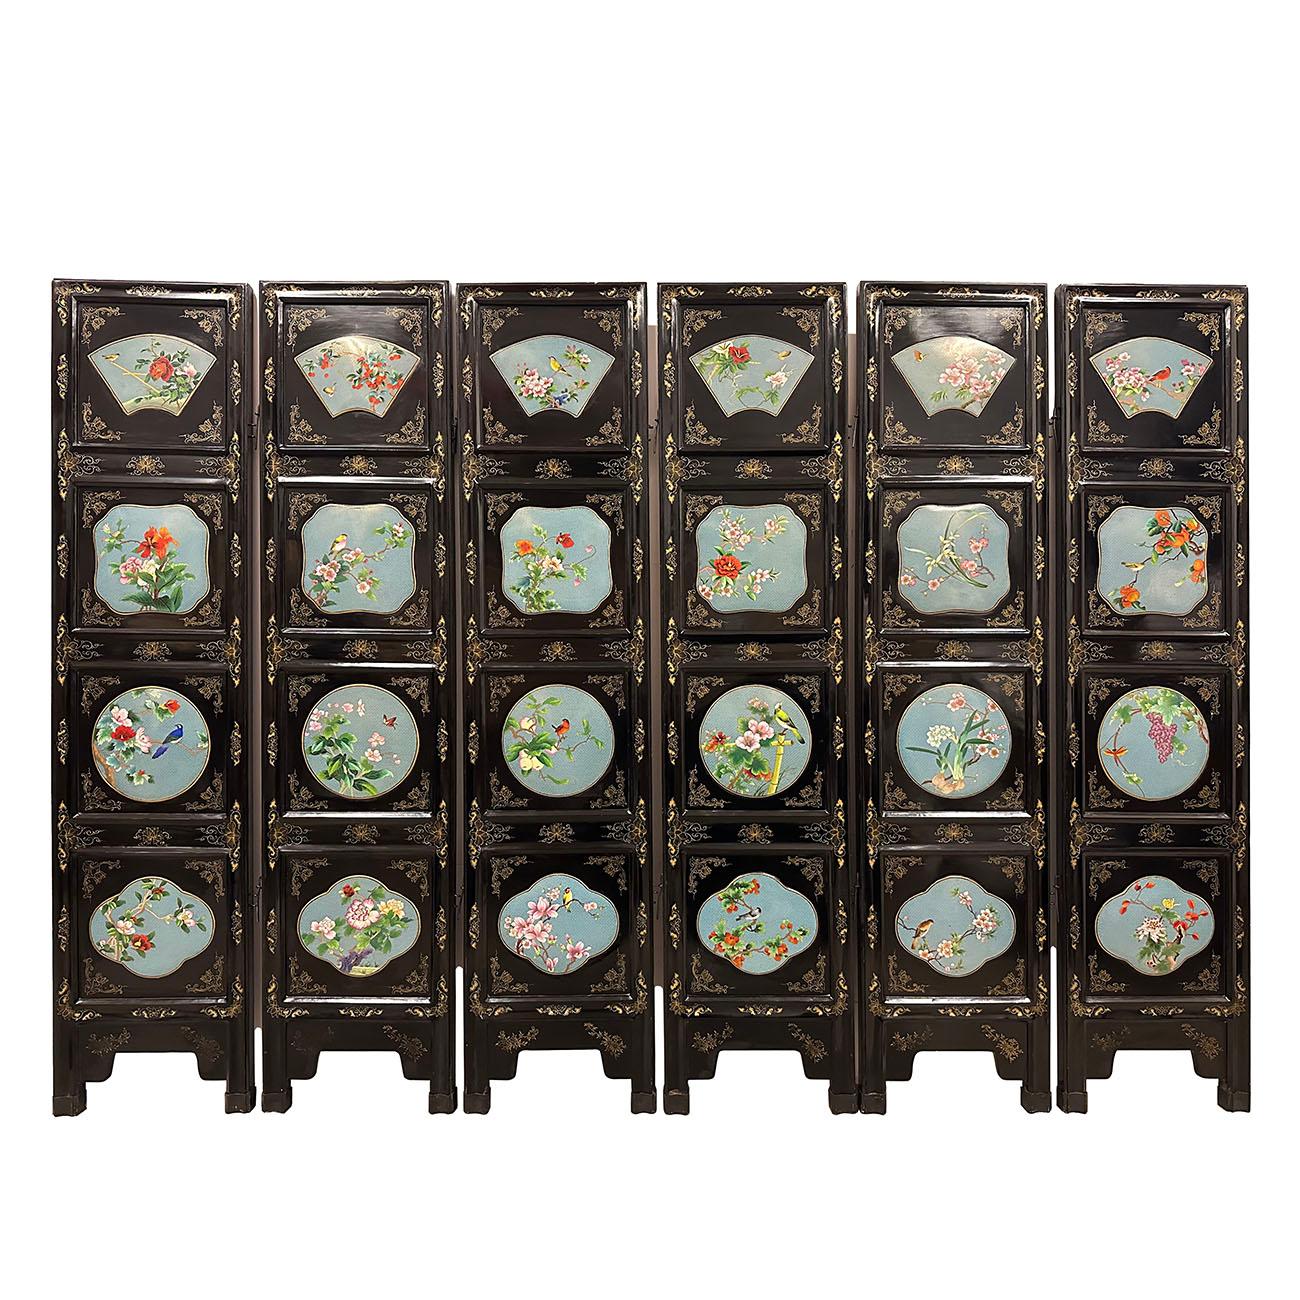 This is a set of 6 panels of Chinese vintage lacquered wooden screen which to be used as the room section panels in ancient China that are put together to make into a screen. Screens have been known to grace the rooms of wealthy Chinese homes since